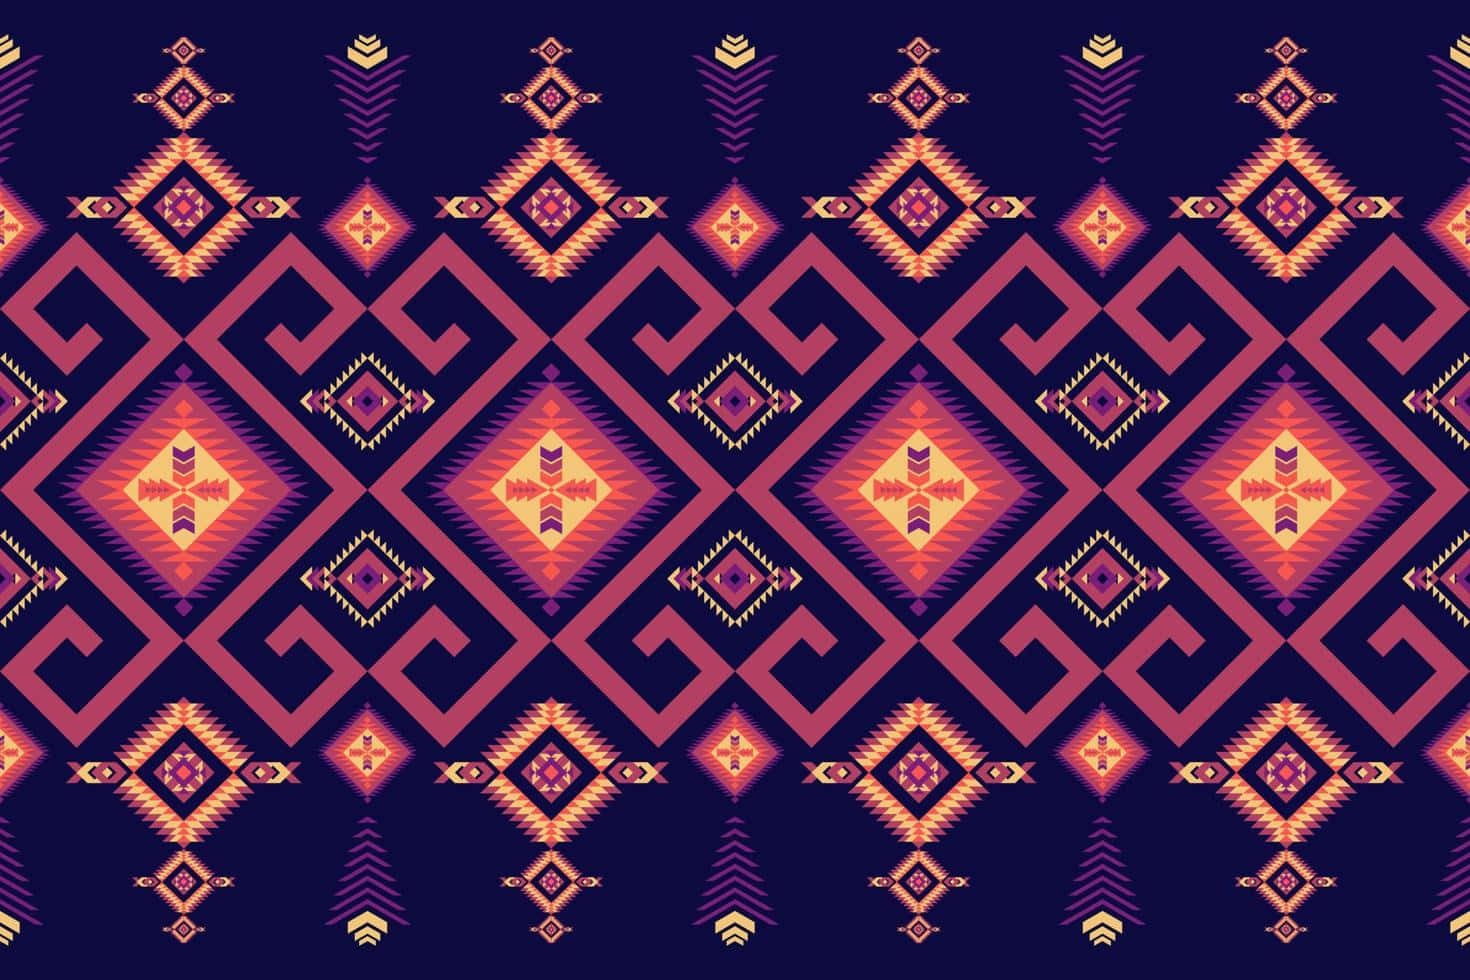 A Colorful Navajo Pattern With A Purple And Orange Design